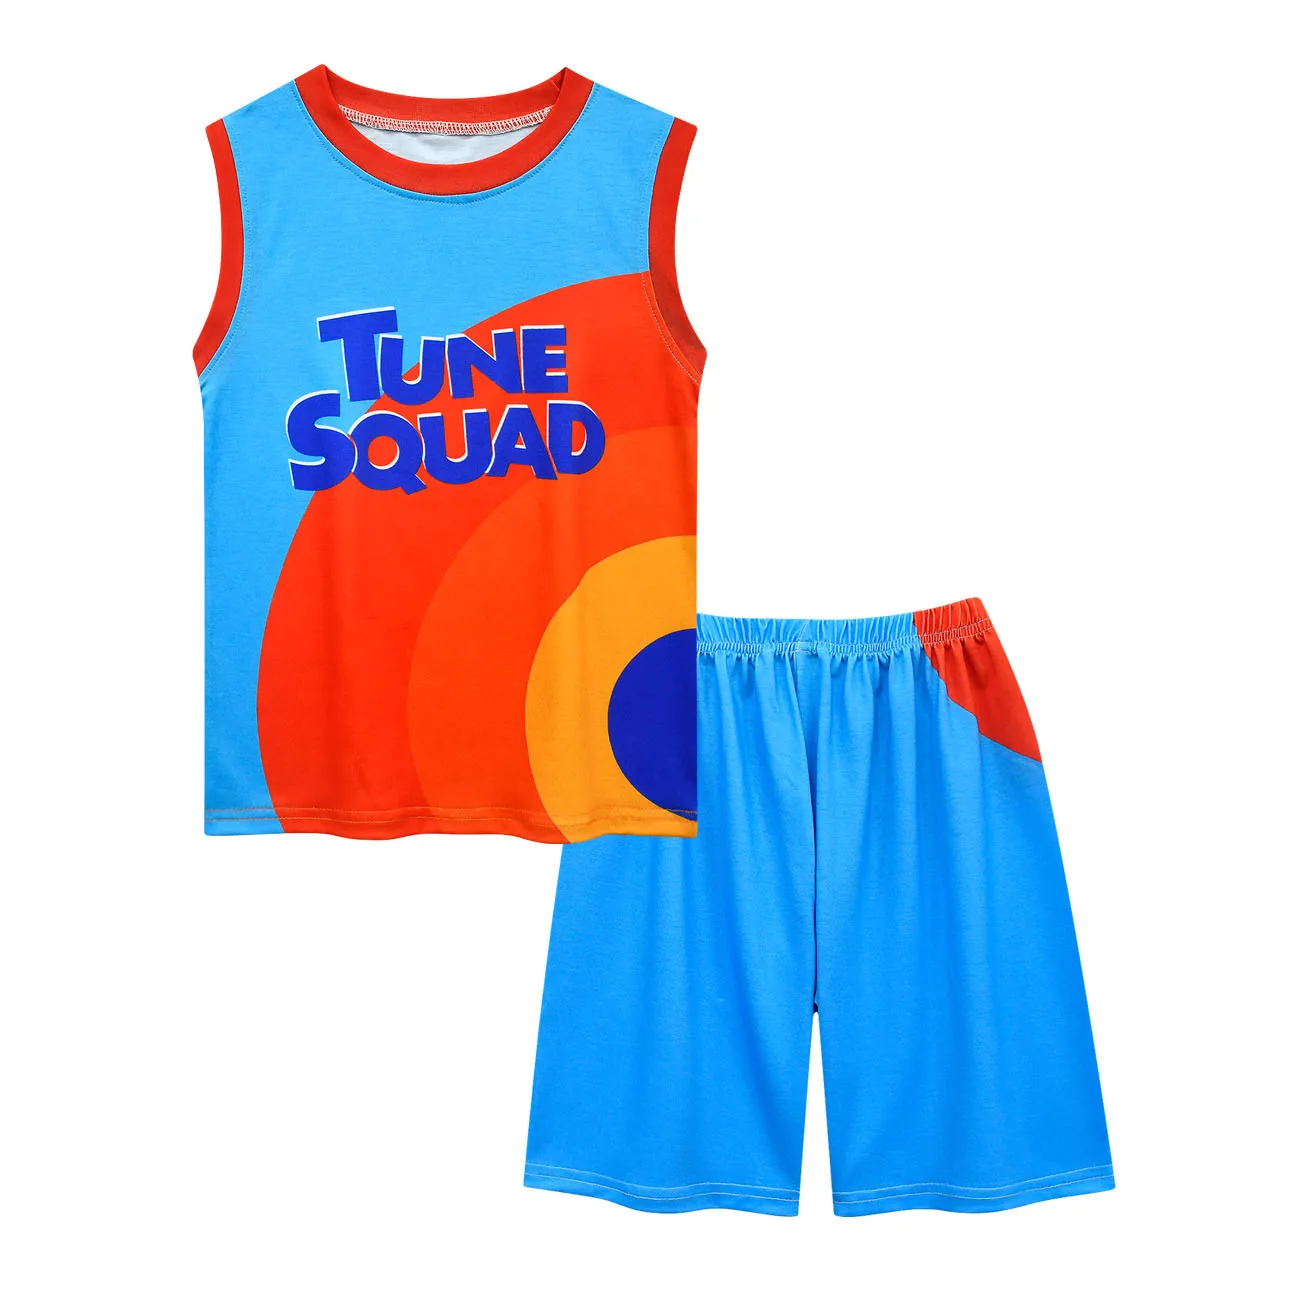 Space Basketball Jersey Jam Cosplay Costume Tune-squad #6 James Top Shorts  Goon Squad A New Legacy Basketball Uniform - Cosplay Costumes - AliExpress